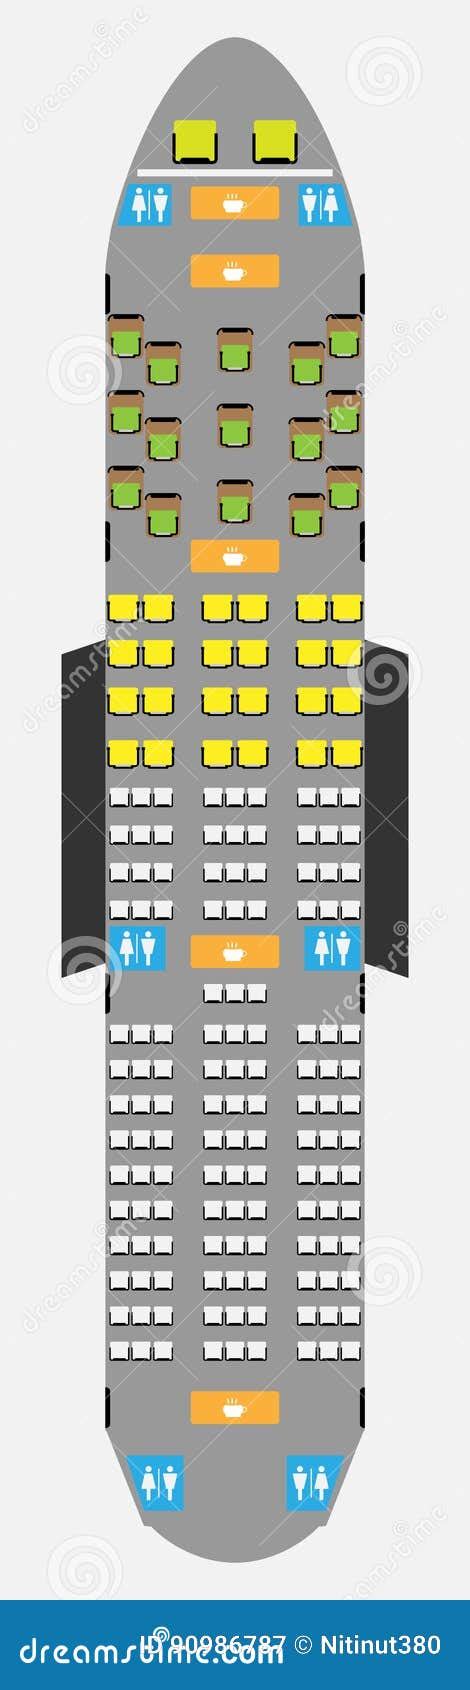 Wide Body Aircraft Seat Map With Restroom And Galley Stock Illustration